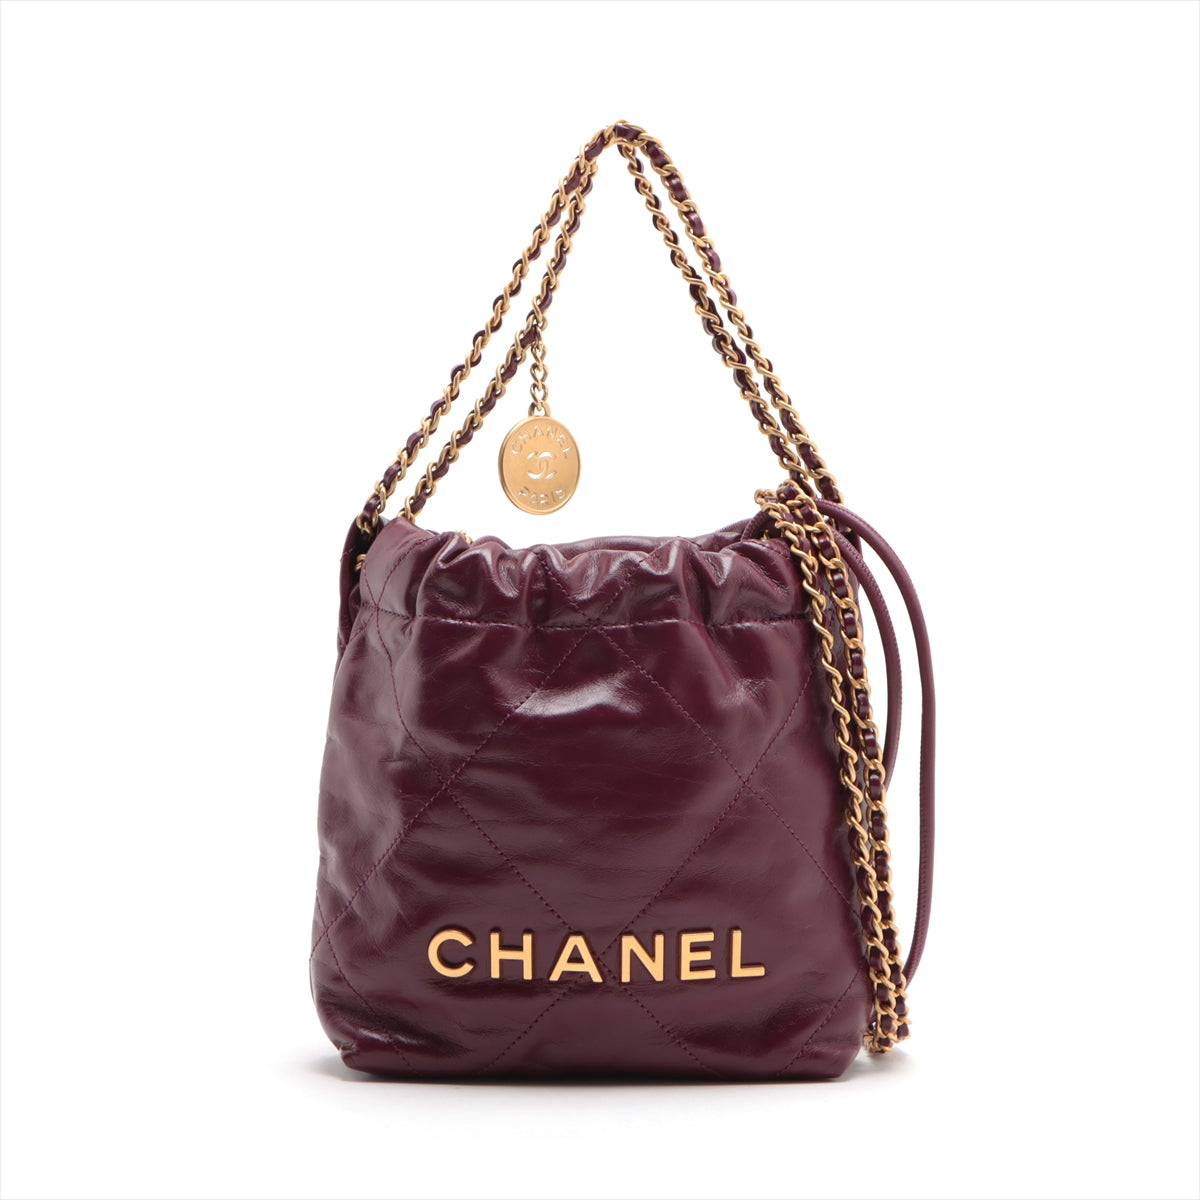 Chanel Chanel 22 mini Leather Chain shoulder bag Purple Gold Metal fittings